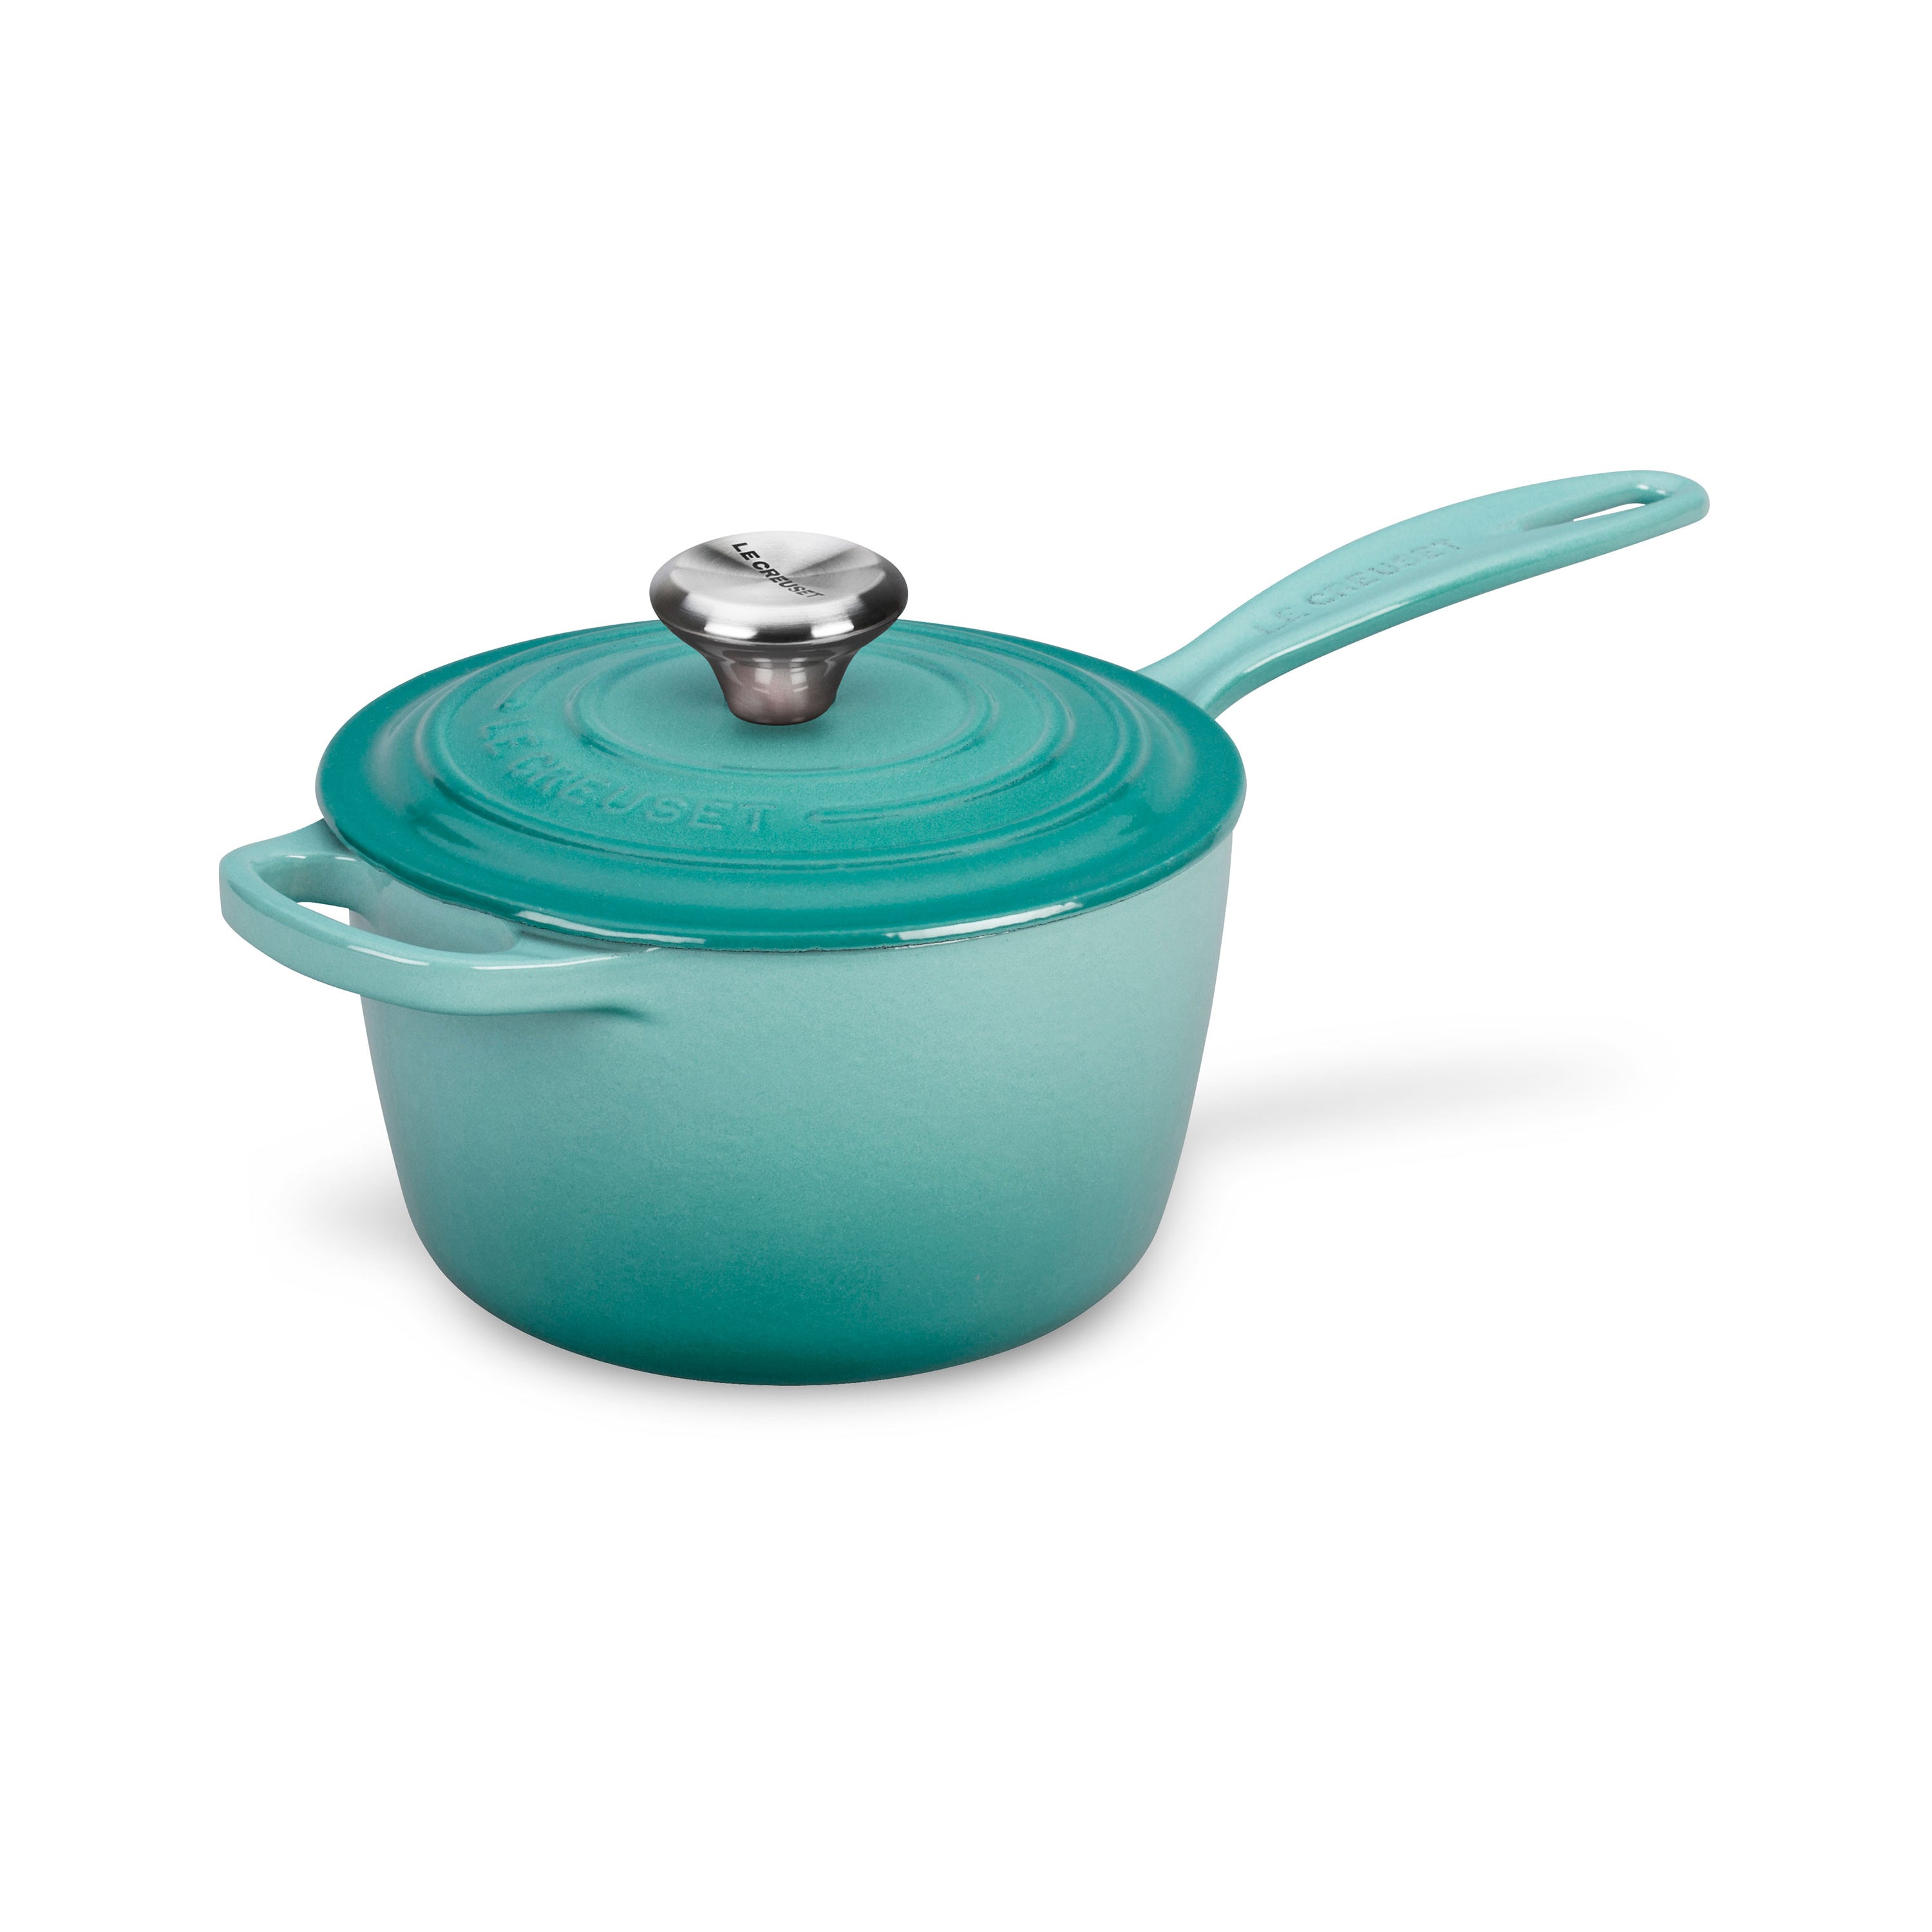 Le Creuset on Instagram: Our enameled cast iron cookware is easy